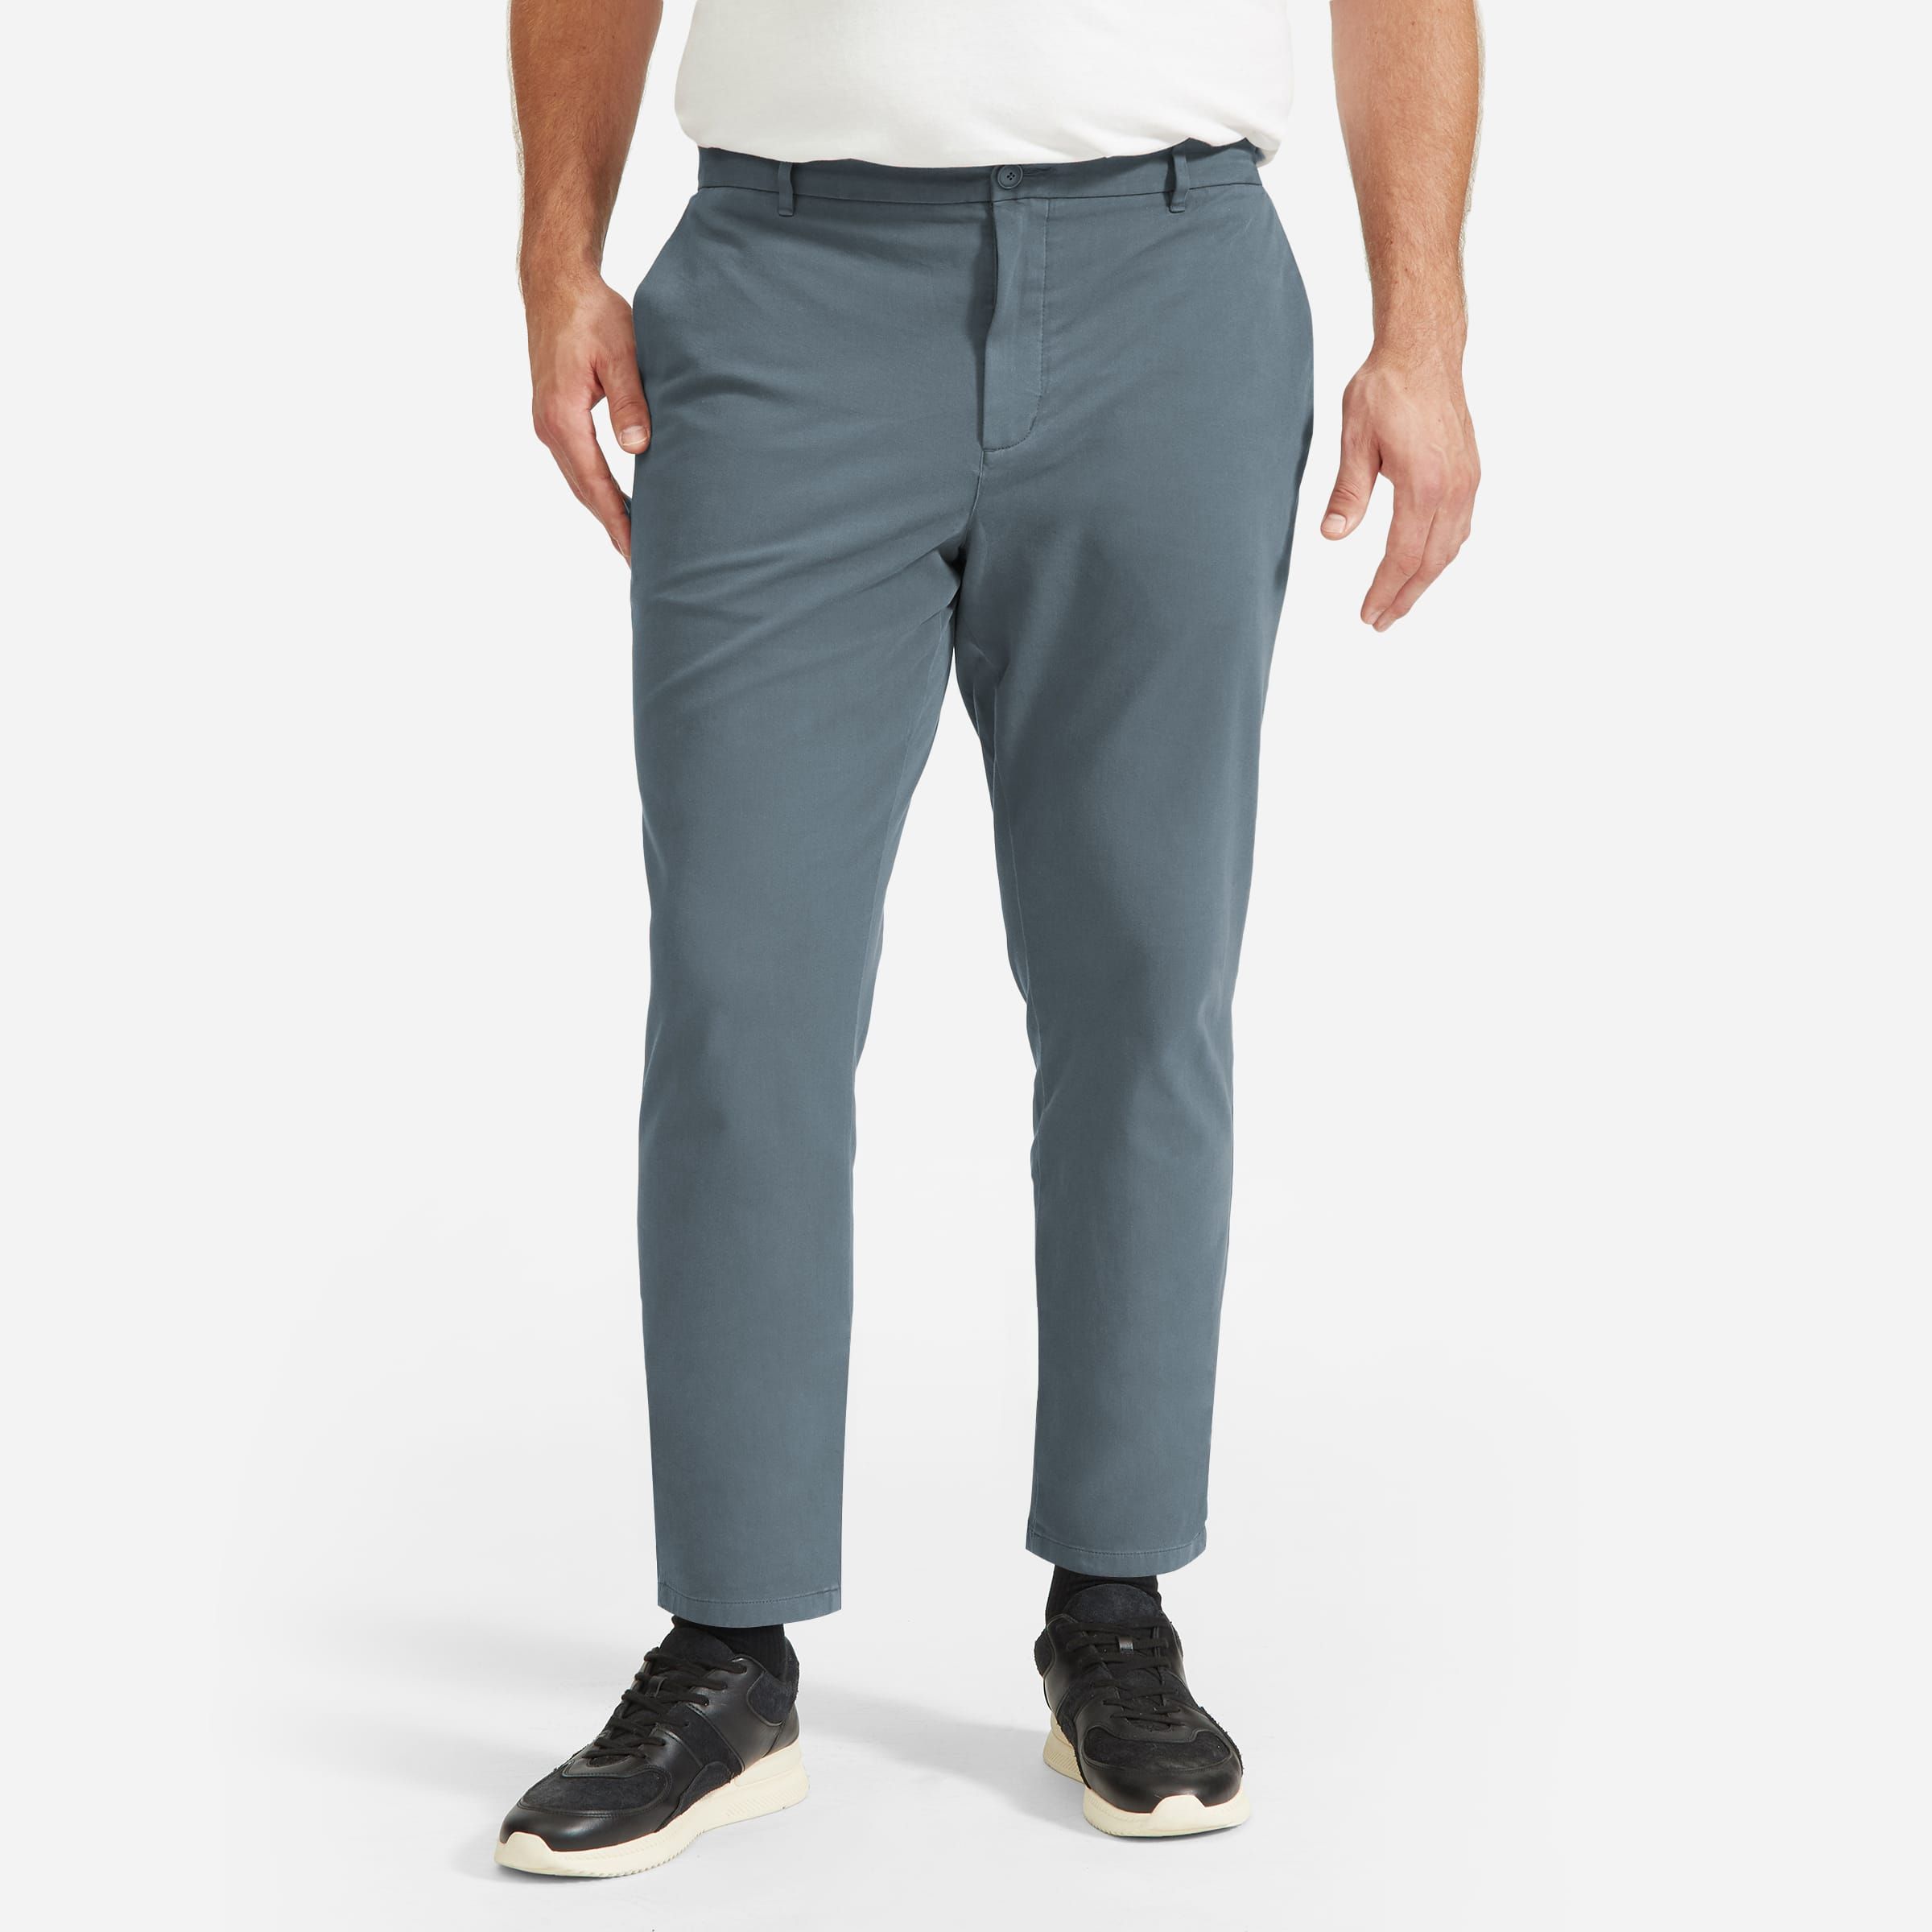 Everlane Athletic Fit Performance Chino